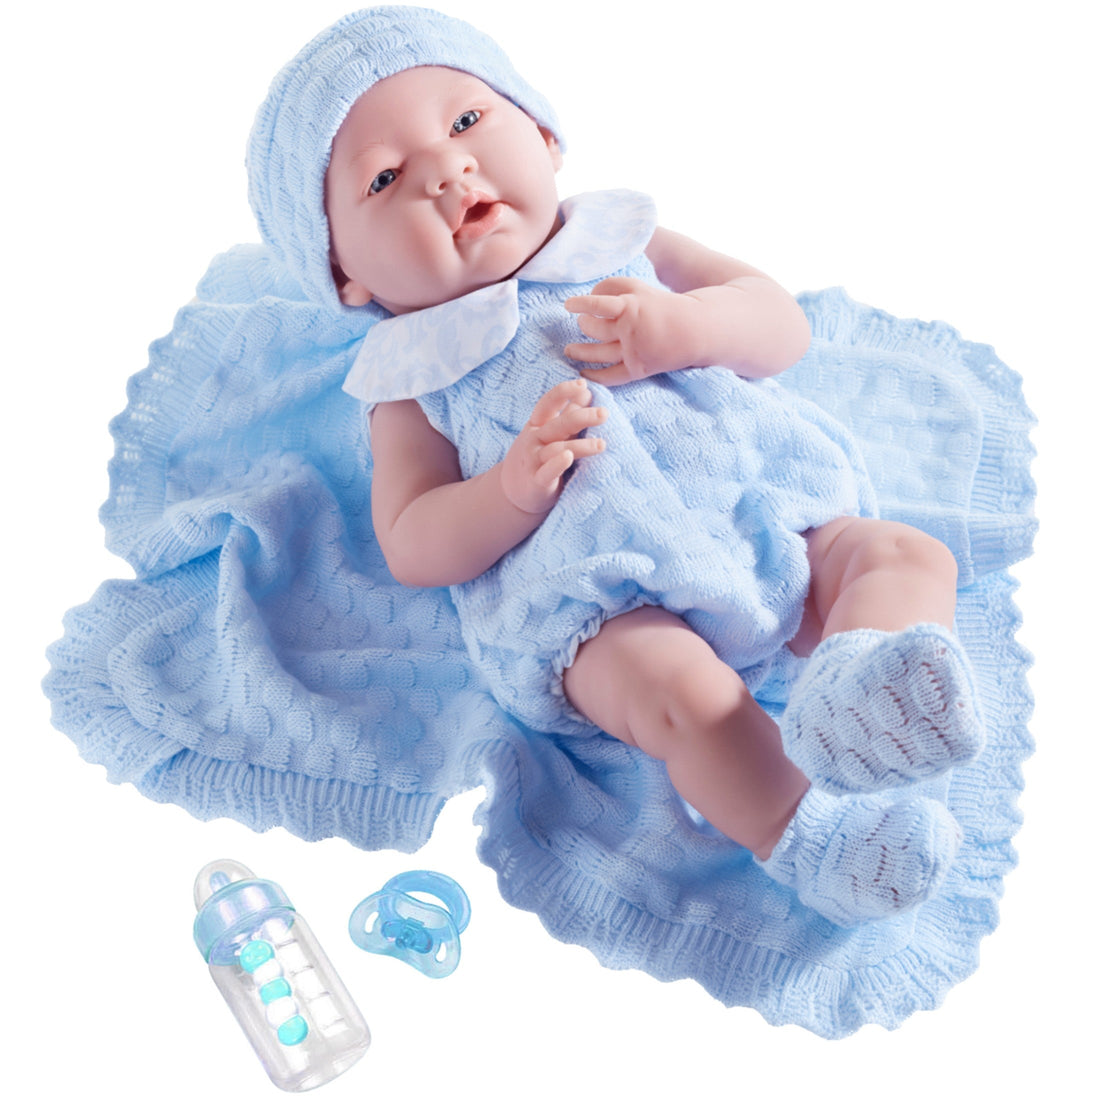 All-Vinyl La Newborn Doll in Blue knit Outfit w/ Blanket - Dolls and Accessories